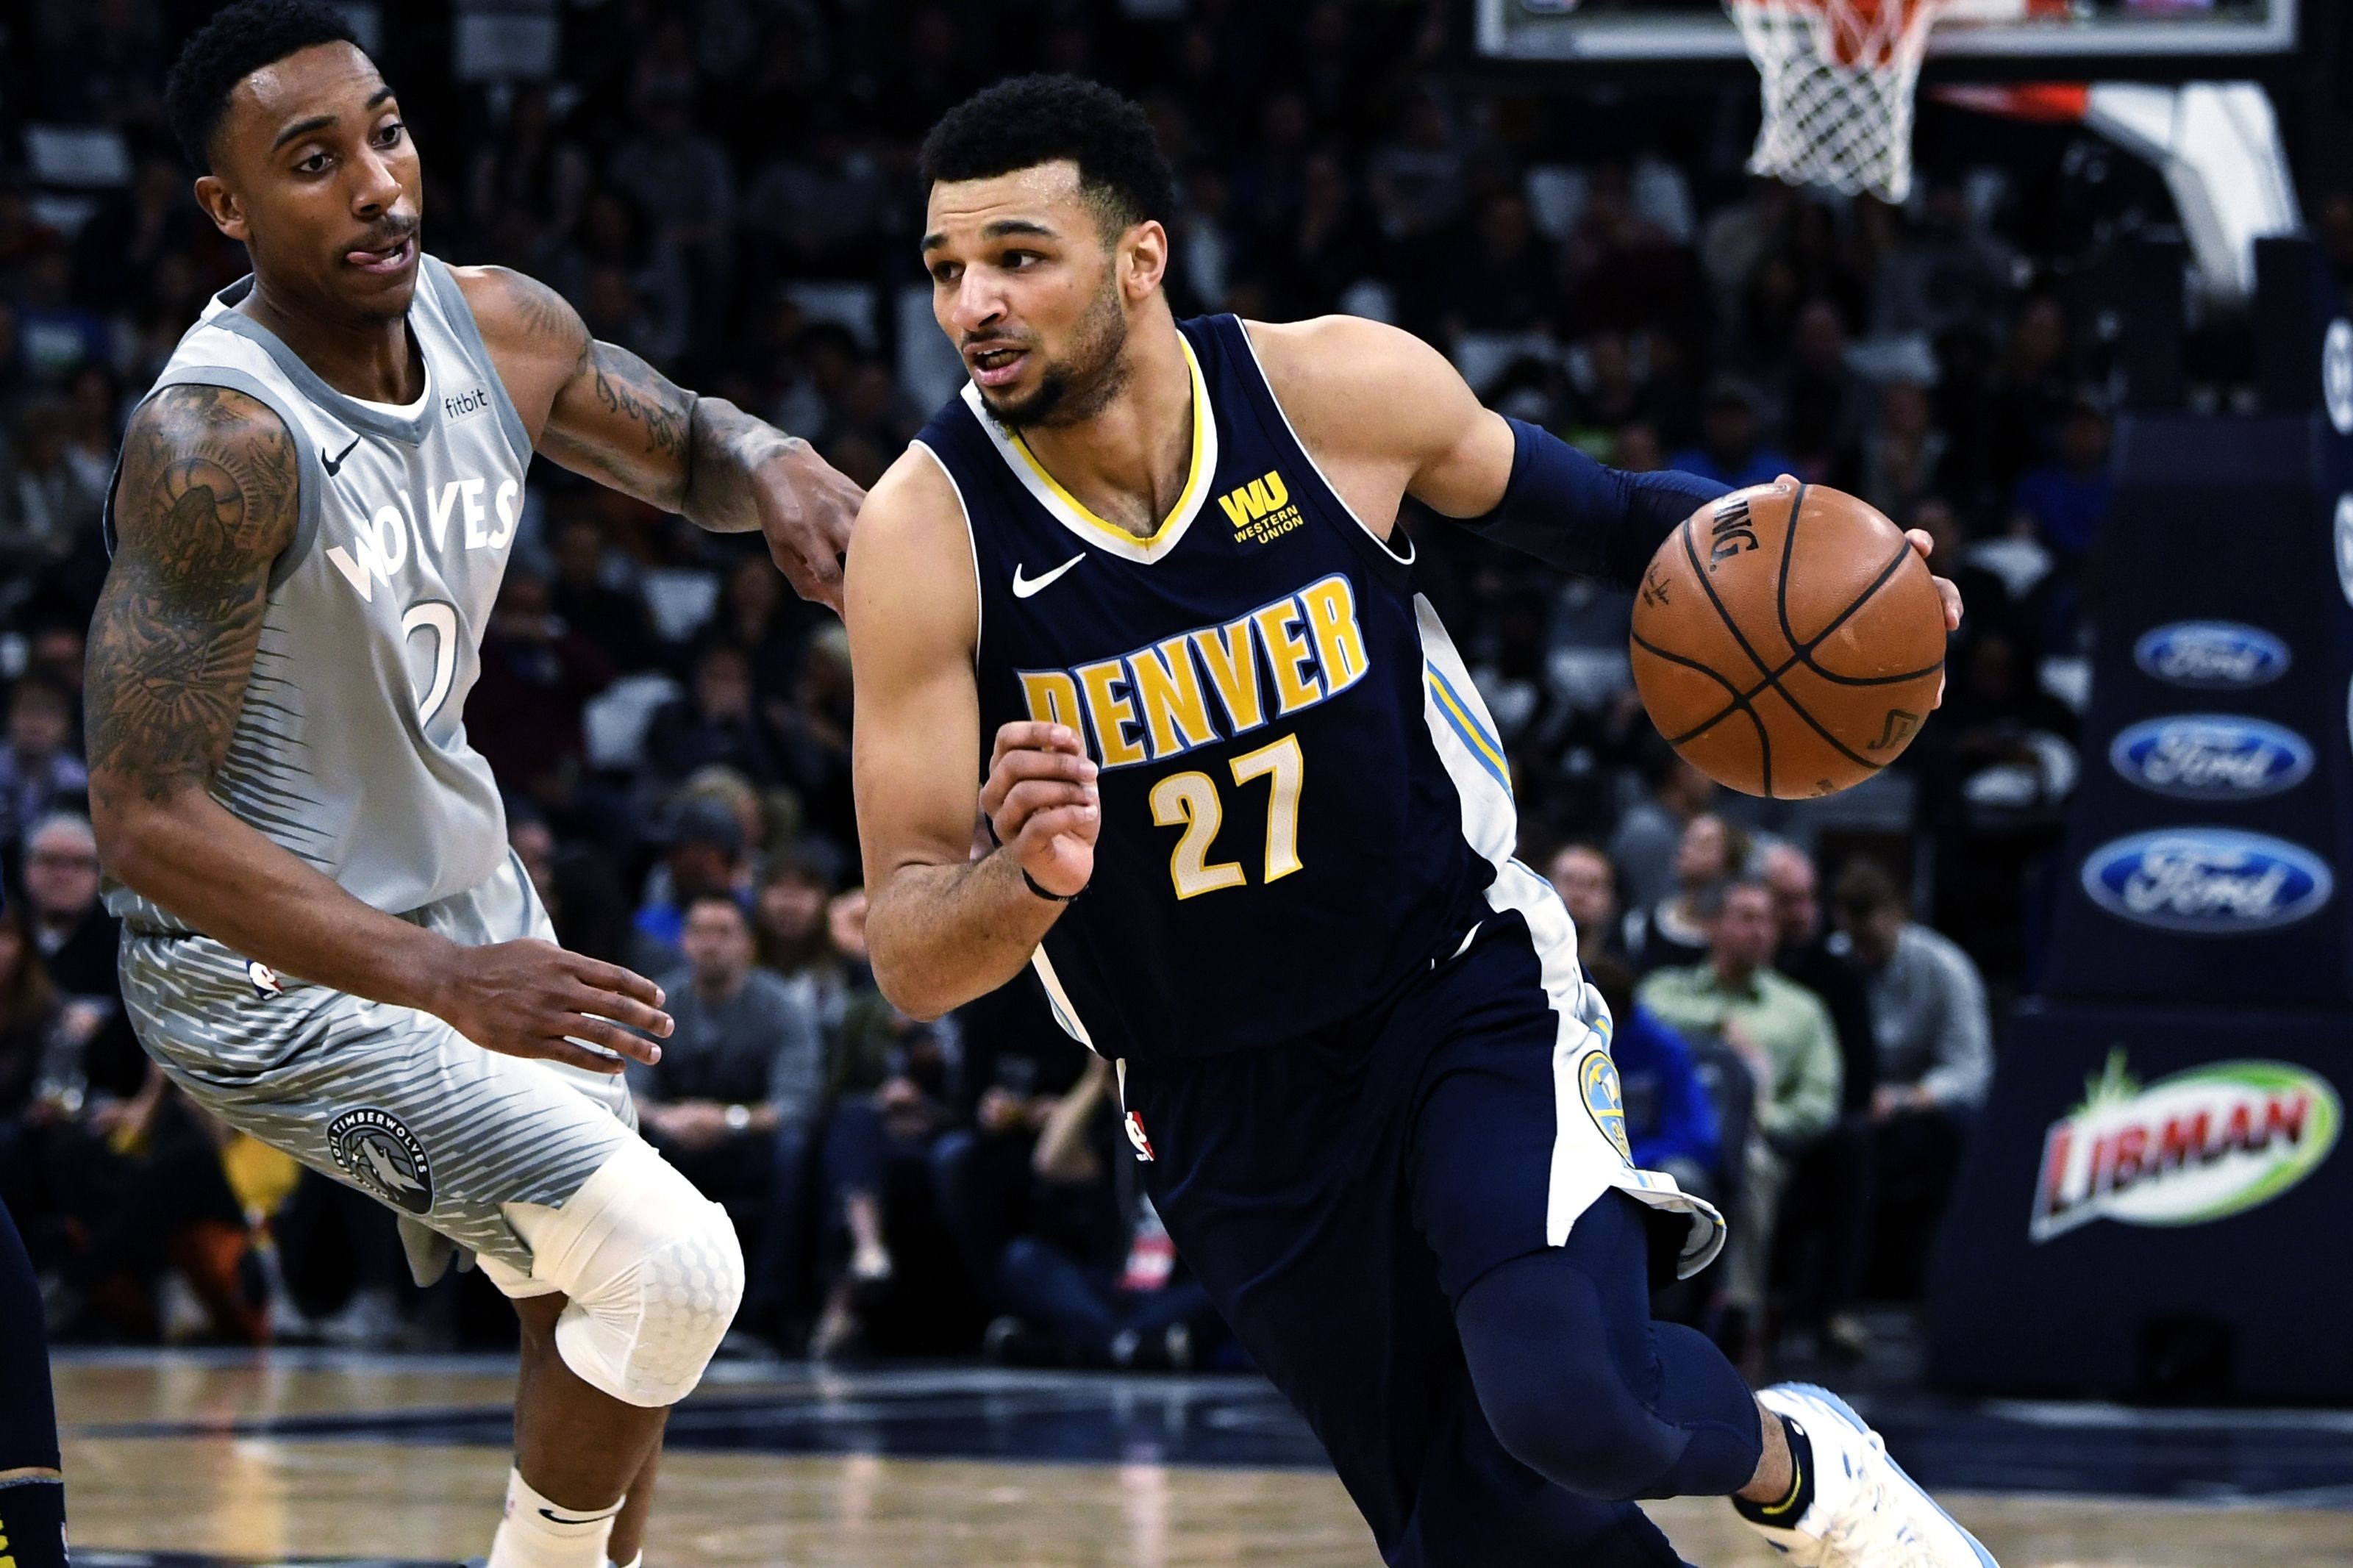 Denver Nuggets: Jamal Murray on pace for a breakout season